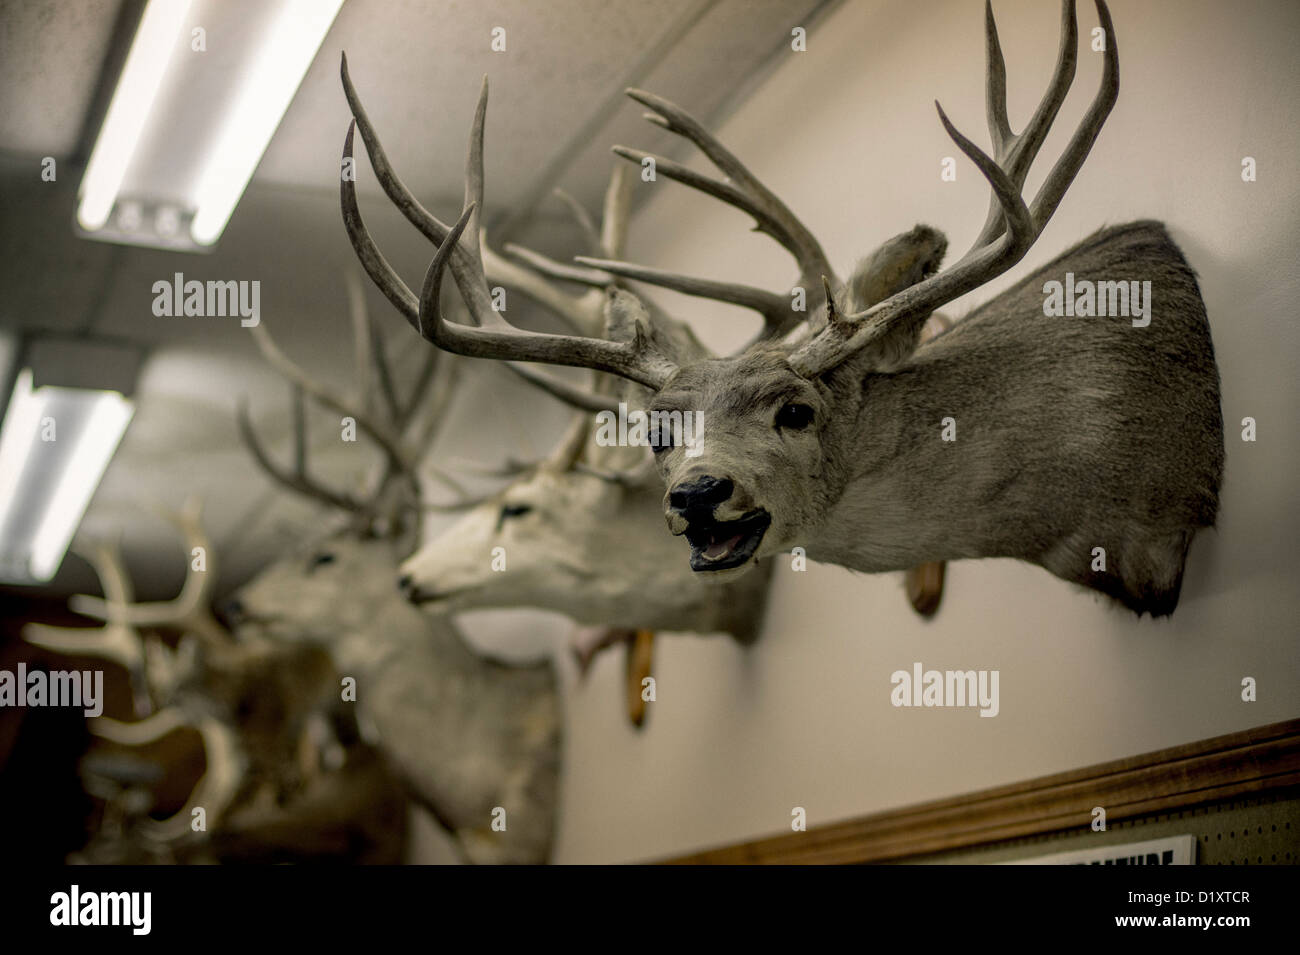 A row of mounted deer heads Stock Photo